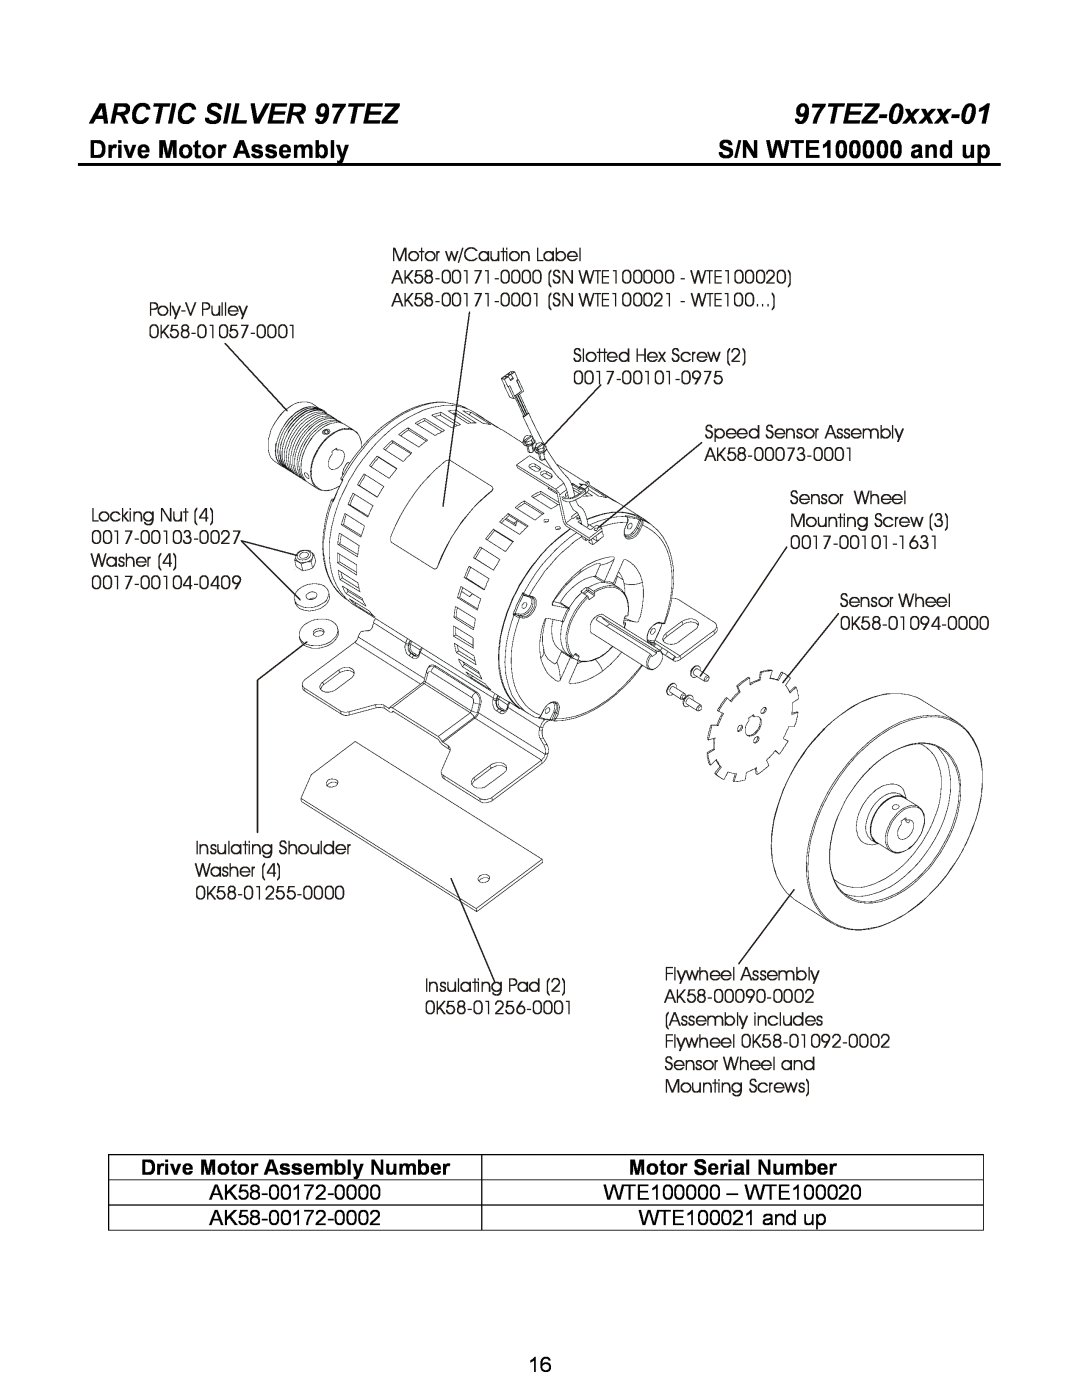 Life Fitness manual Drive Motor Assembly, S/N WTE100000 and up, ARCTIC SILVER 97TEZ, 97TEZ-0xxx-01, AK58-00172-0000 